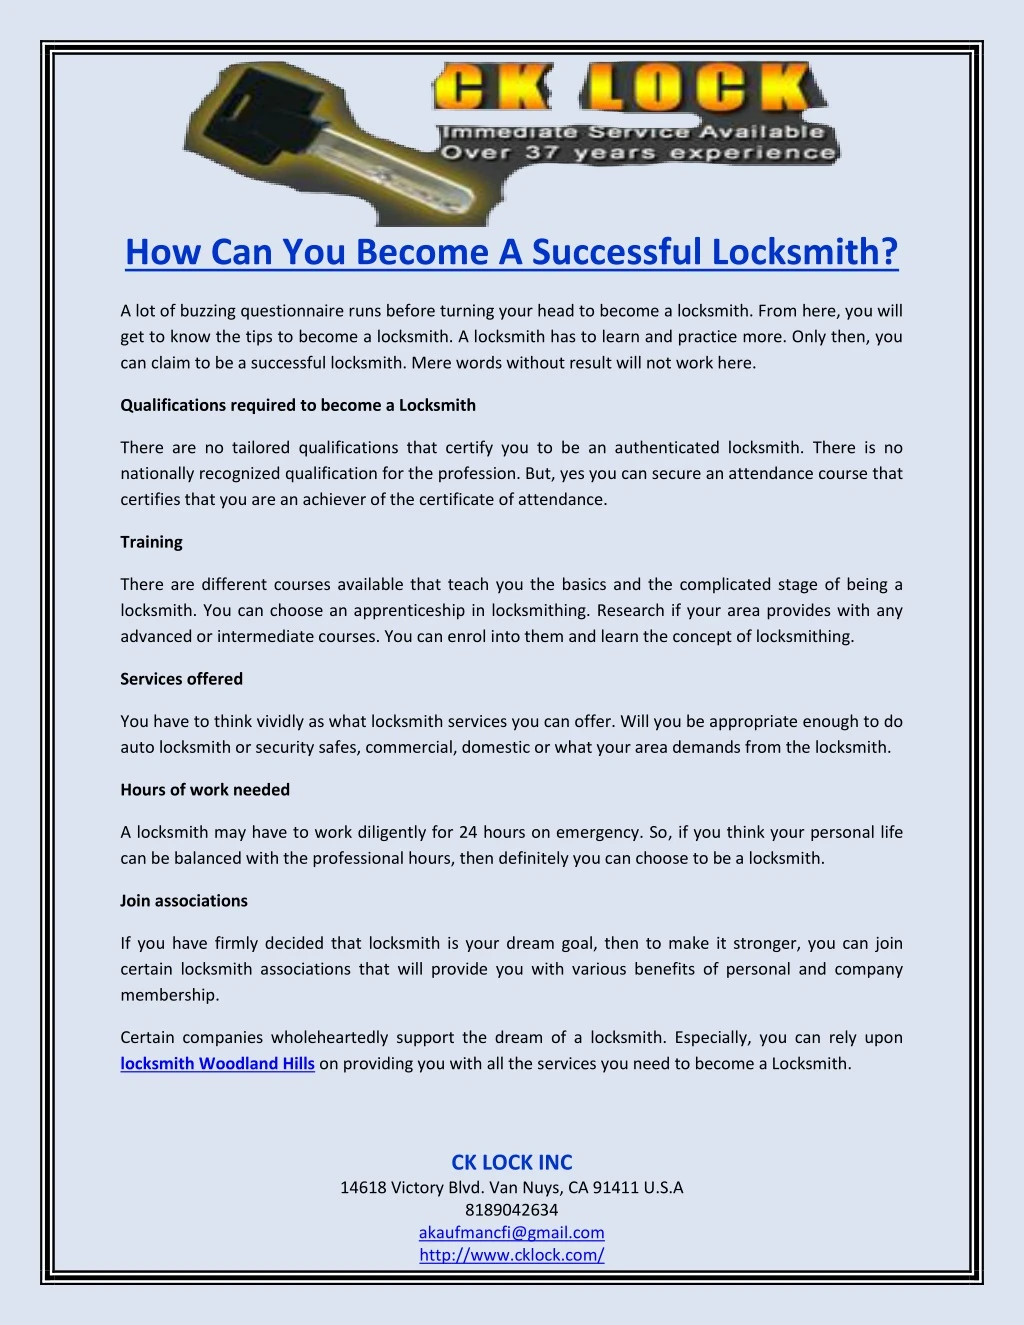 how can you become a successful locksmith